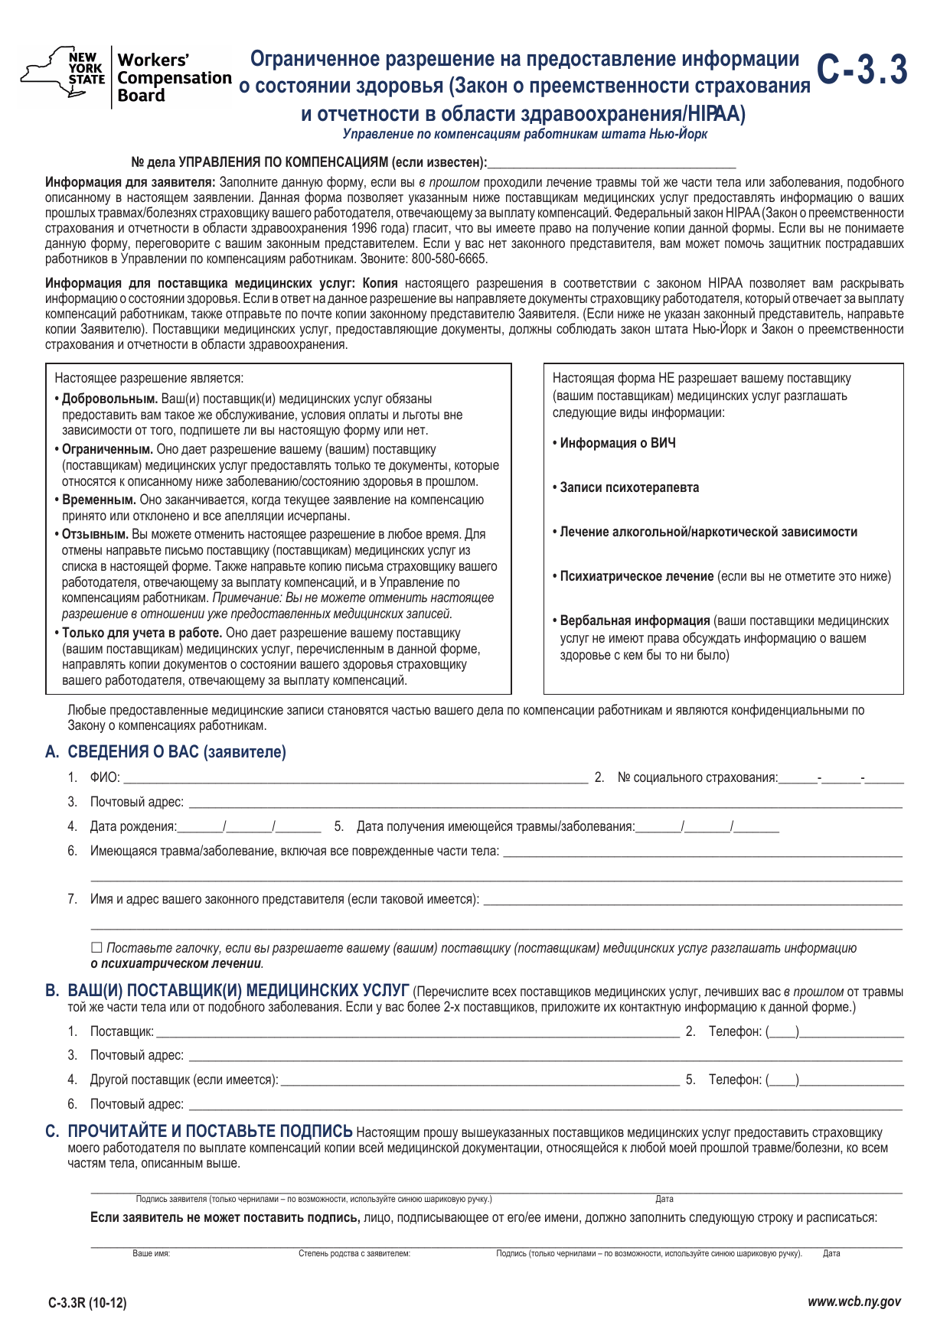 Form C-3.3R Limited Release of Health Information (HIPAA) - New York (Russian), Page 1